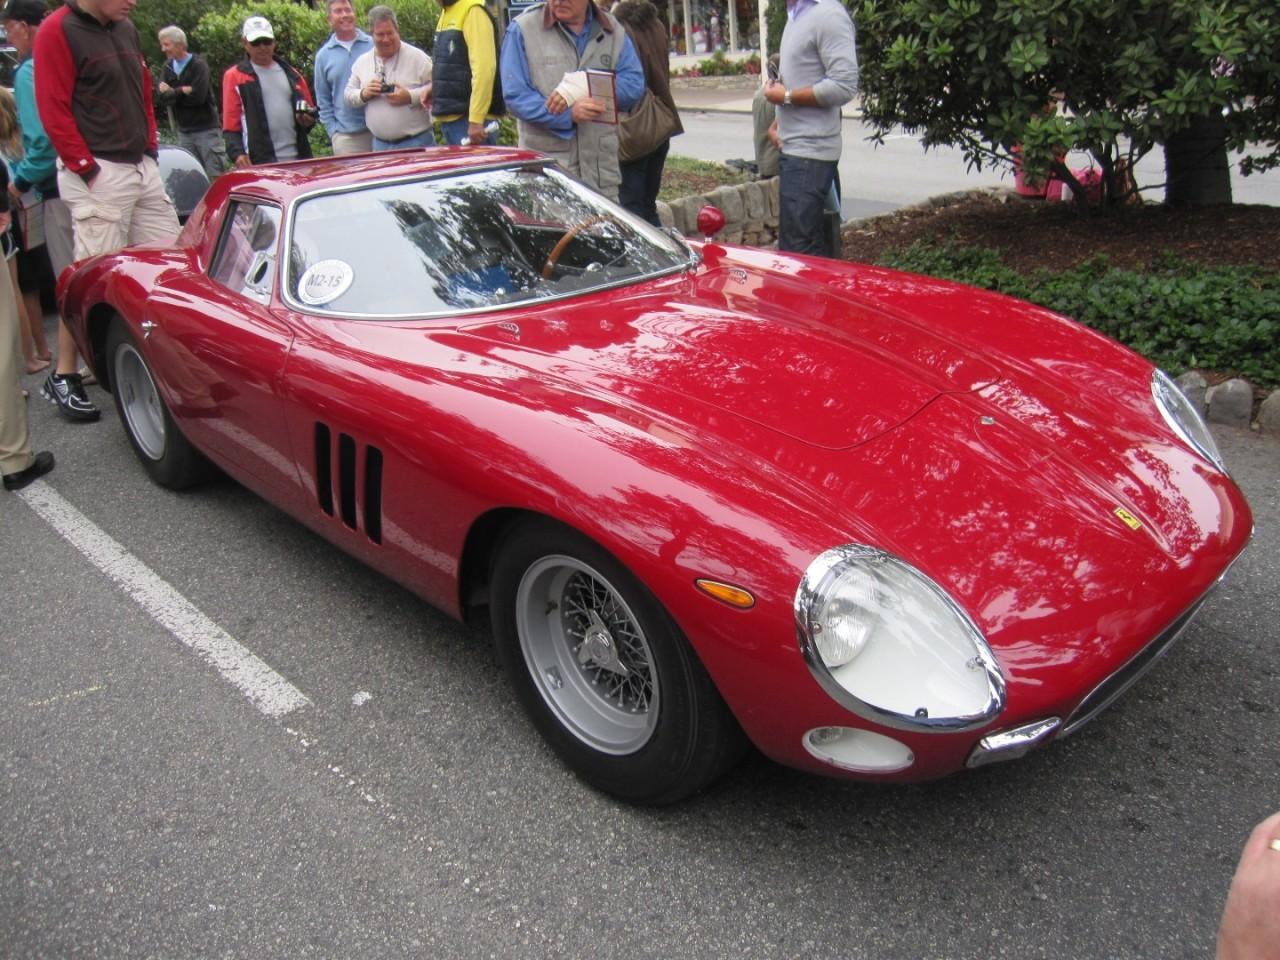 Ferrari 250 GTO #4091GT is owned by Peter Sachs of the famous New York investment bank Goldman Sachs.